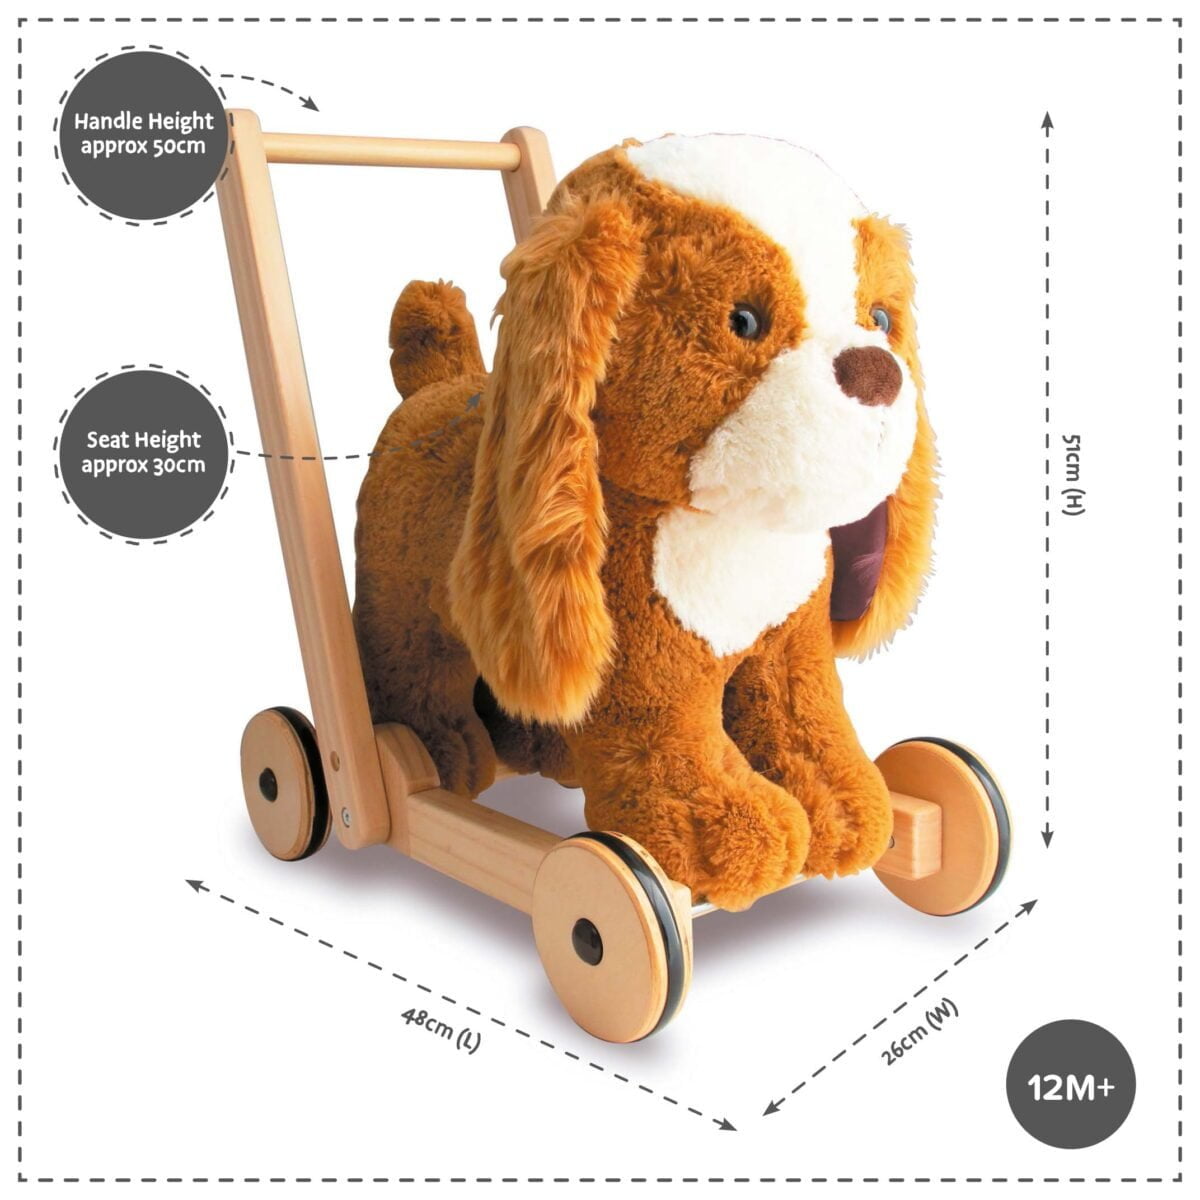 Product dimensions shown for Peanut Pup Baby walker 